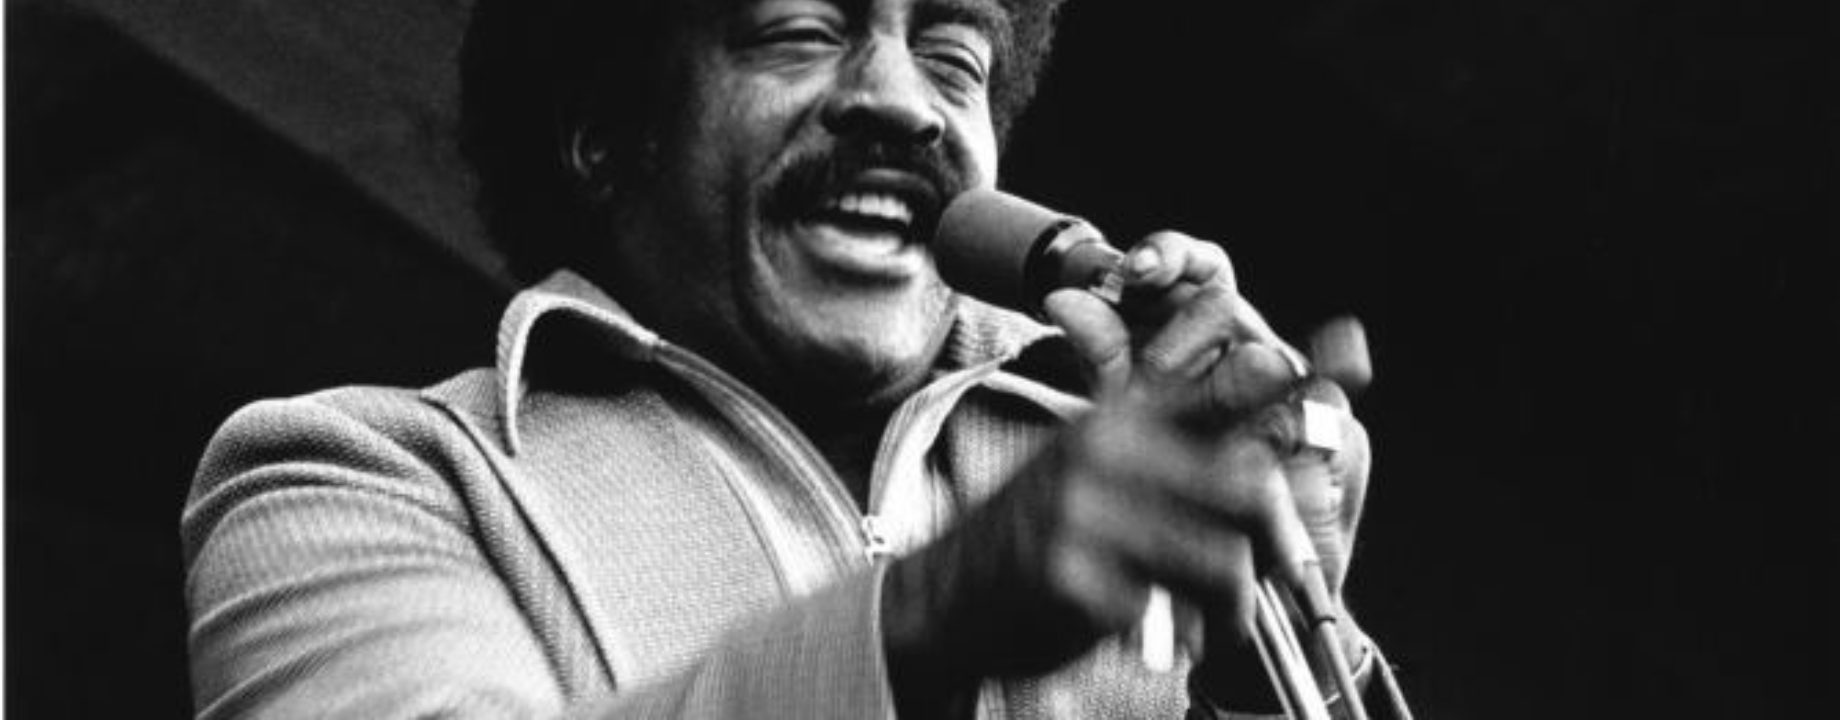 Jimmy witherspoon